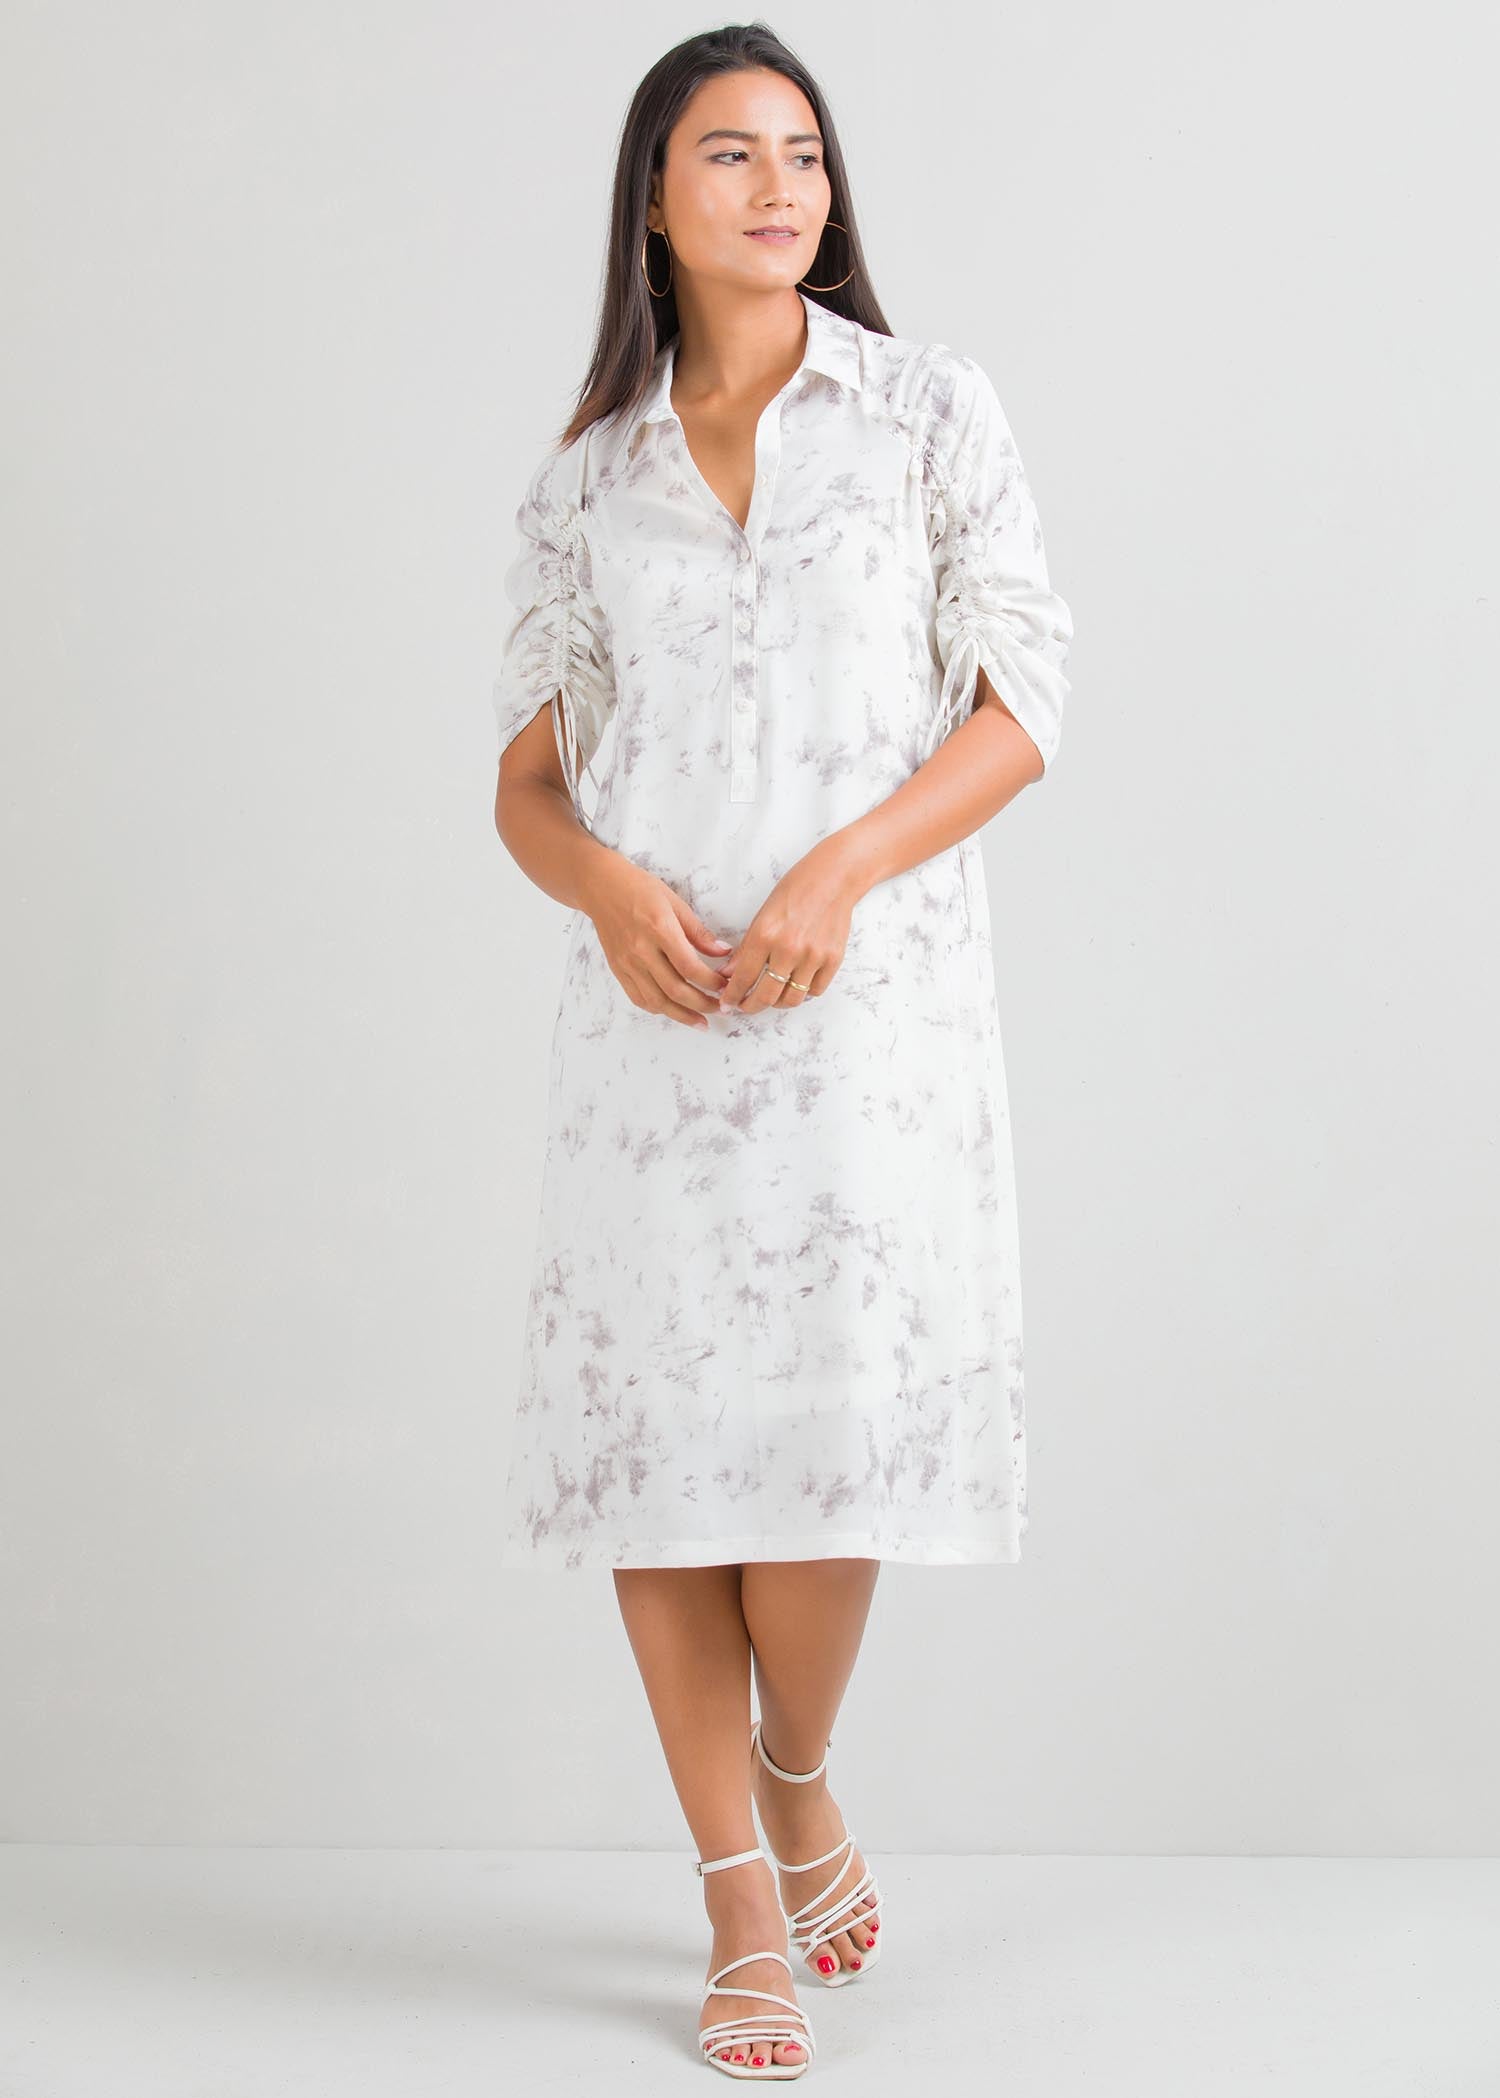 Printed dress with sleeve detail